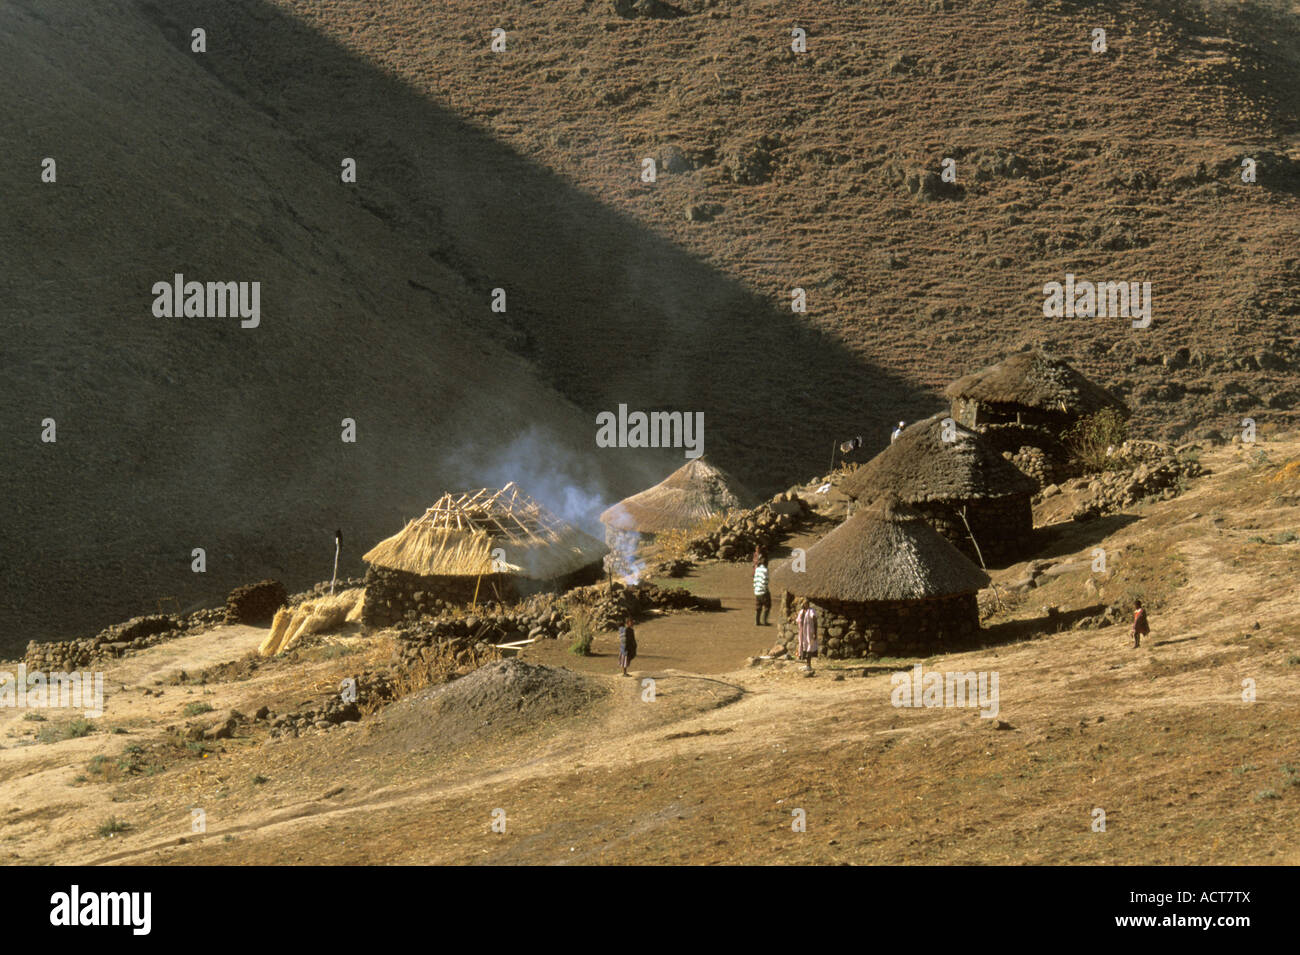 Traditional stone and thatch homesteads built on a hillside sloping down to an enclosed valley Lesotho Stock Photo